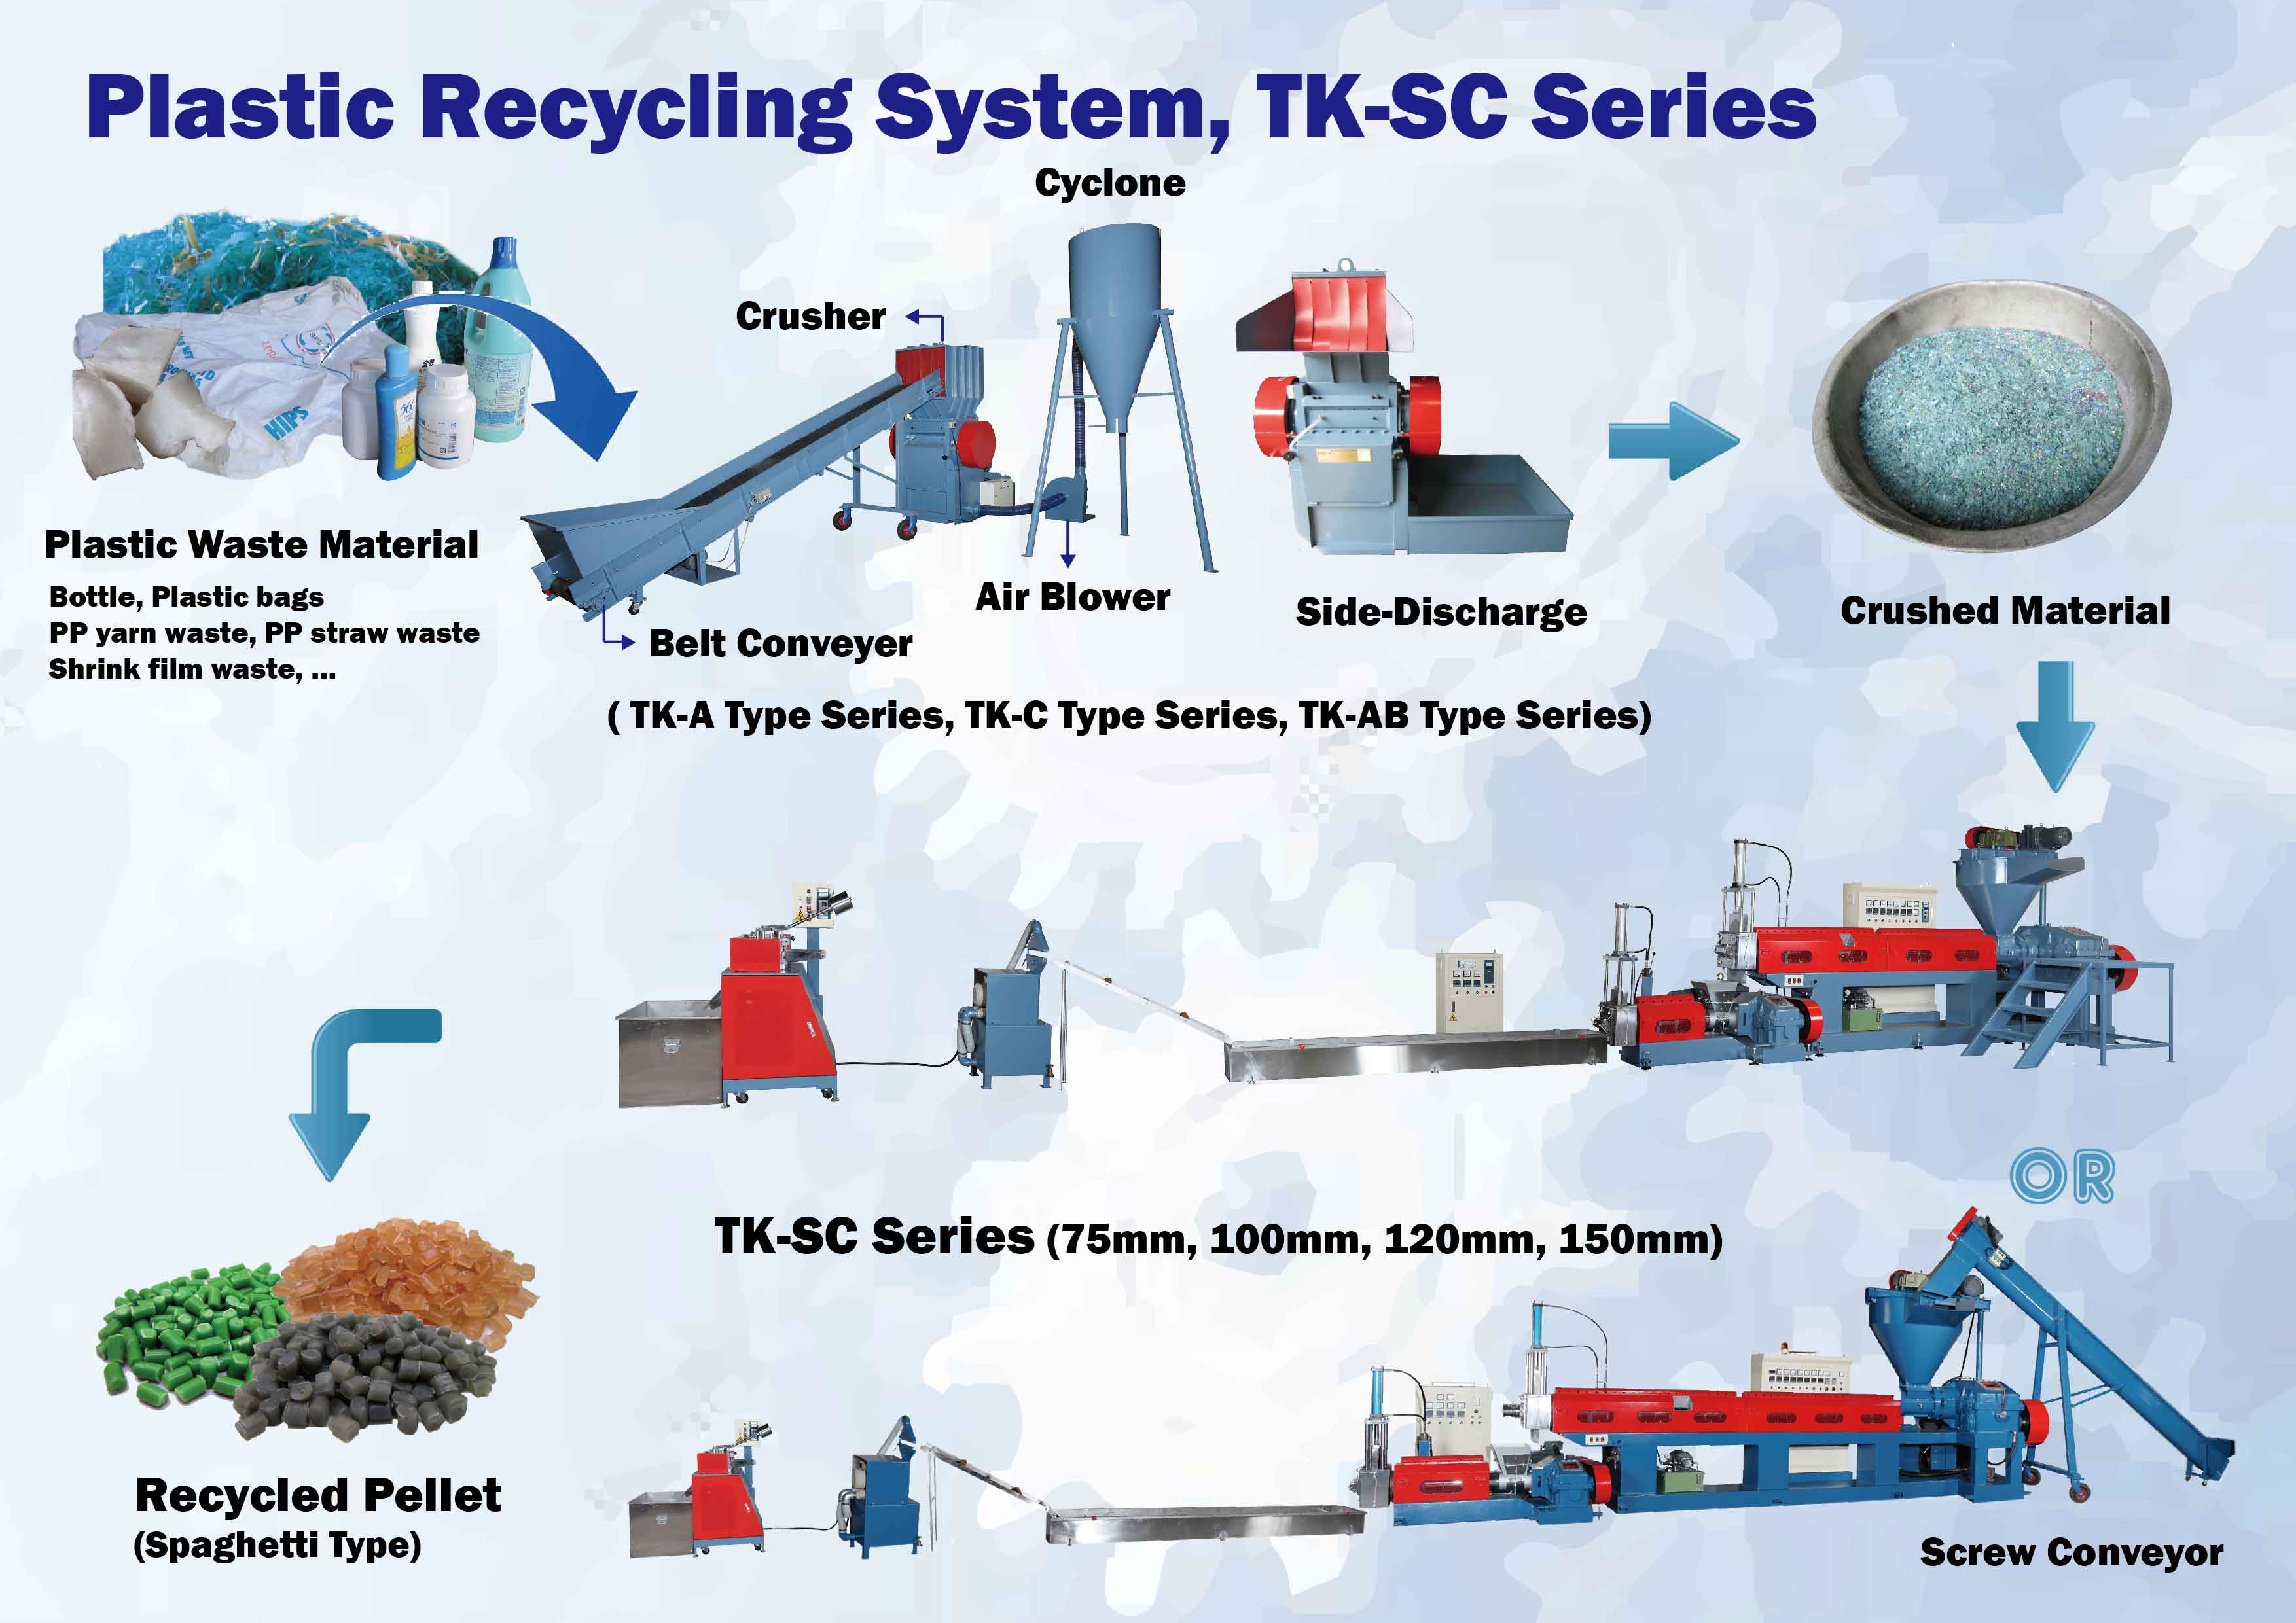 Flow Chart of Plastic Recycling System, TK-SC Series